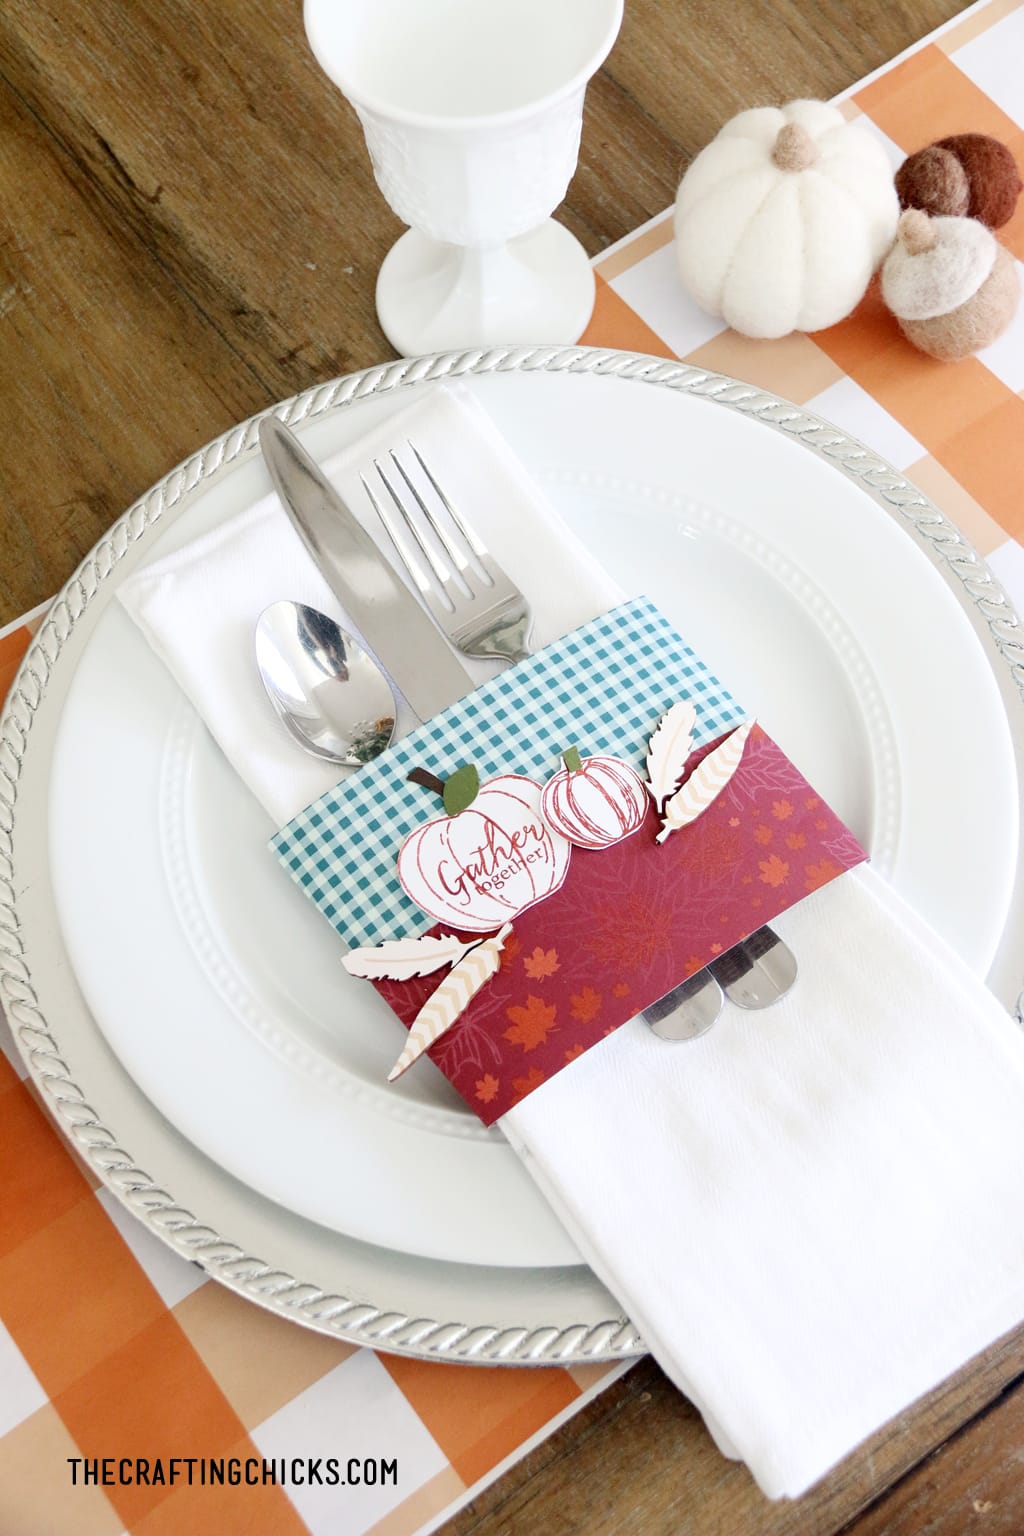 Easy Thanksgiving place setting with orange plaid place mat, white plate, and stamped napkin ring with pumpkins.